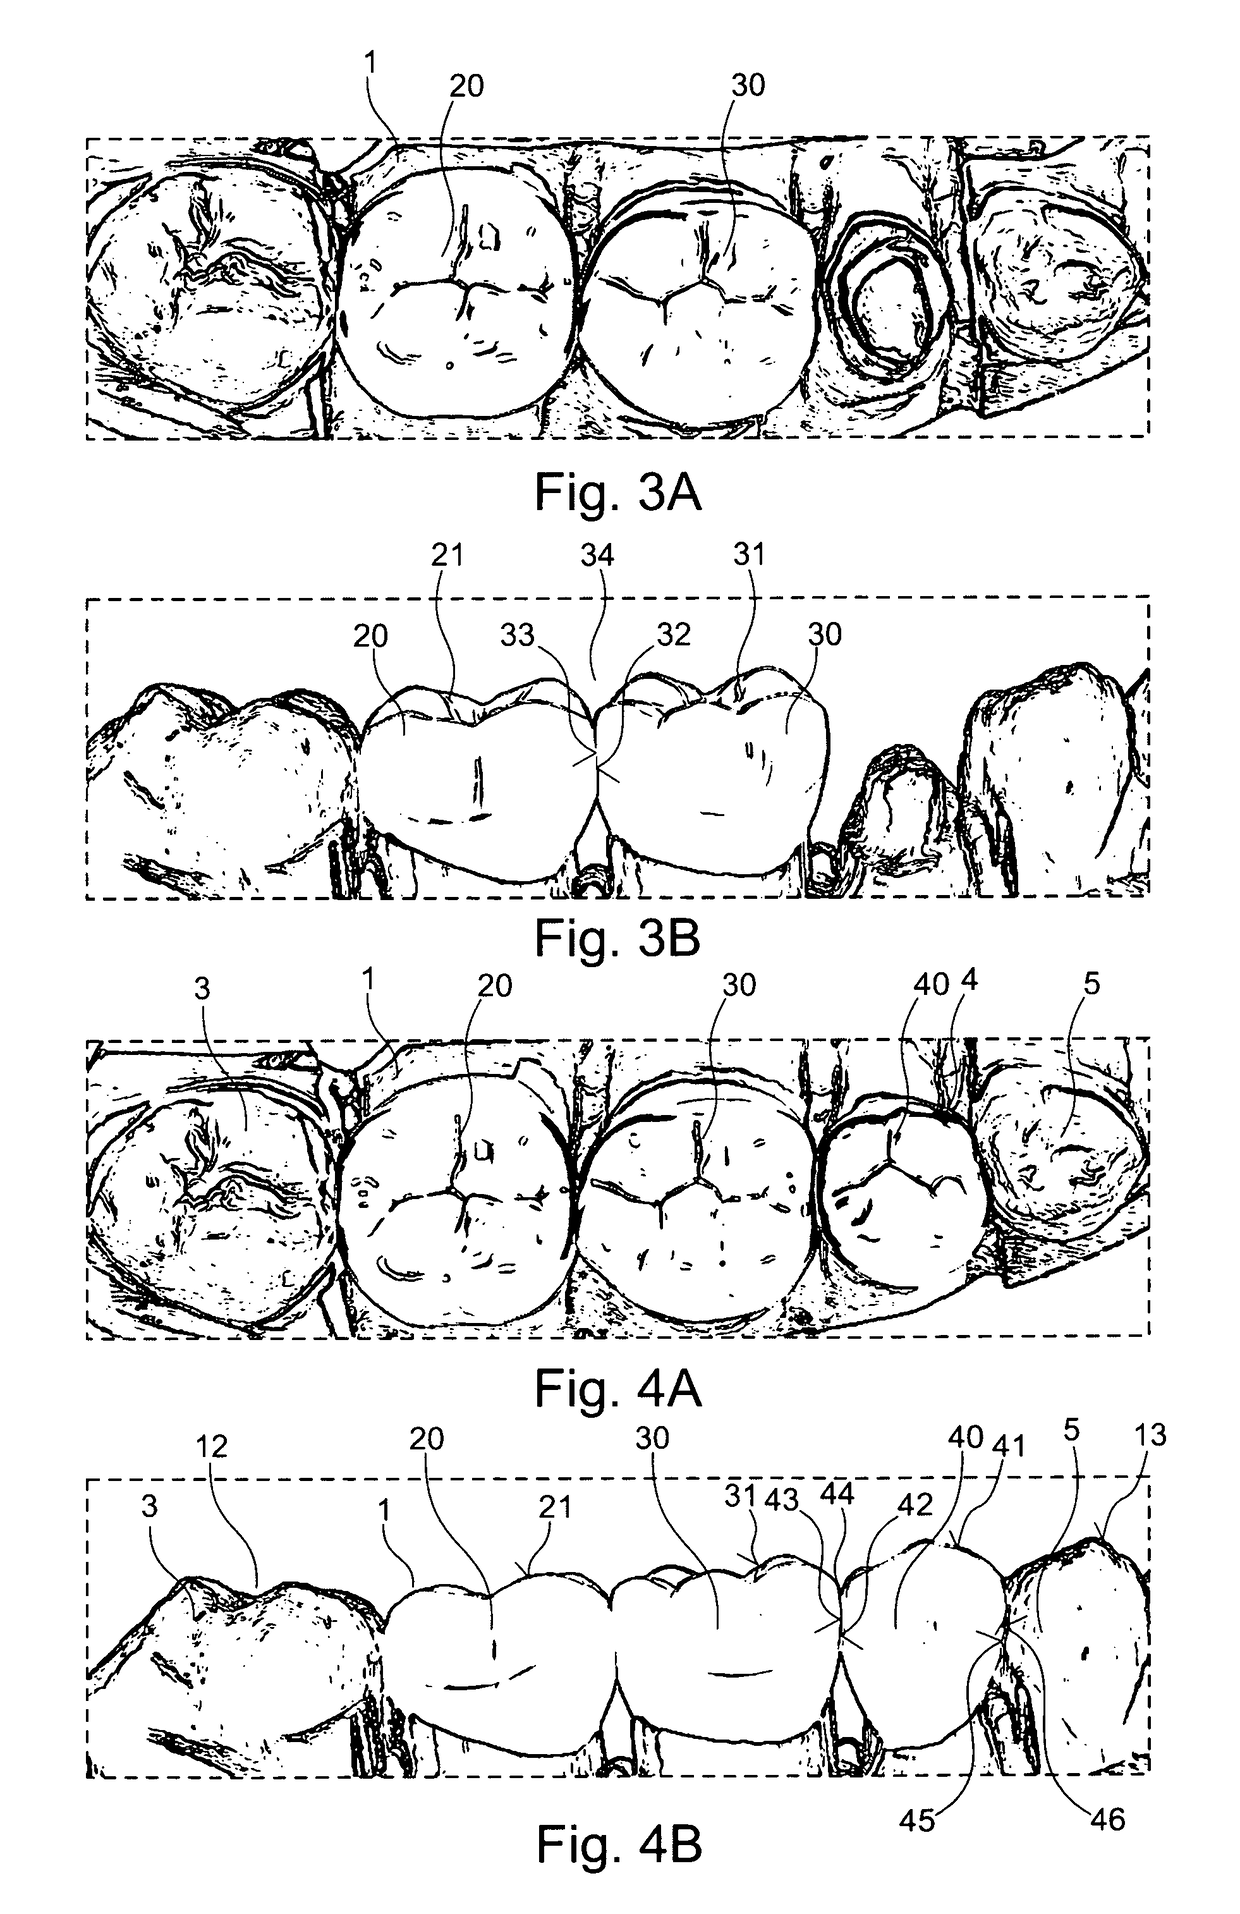 Method for designing a plurality of adjacent tooth restorations using CAD/CAM technology